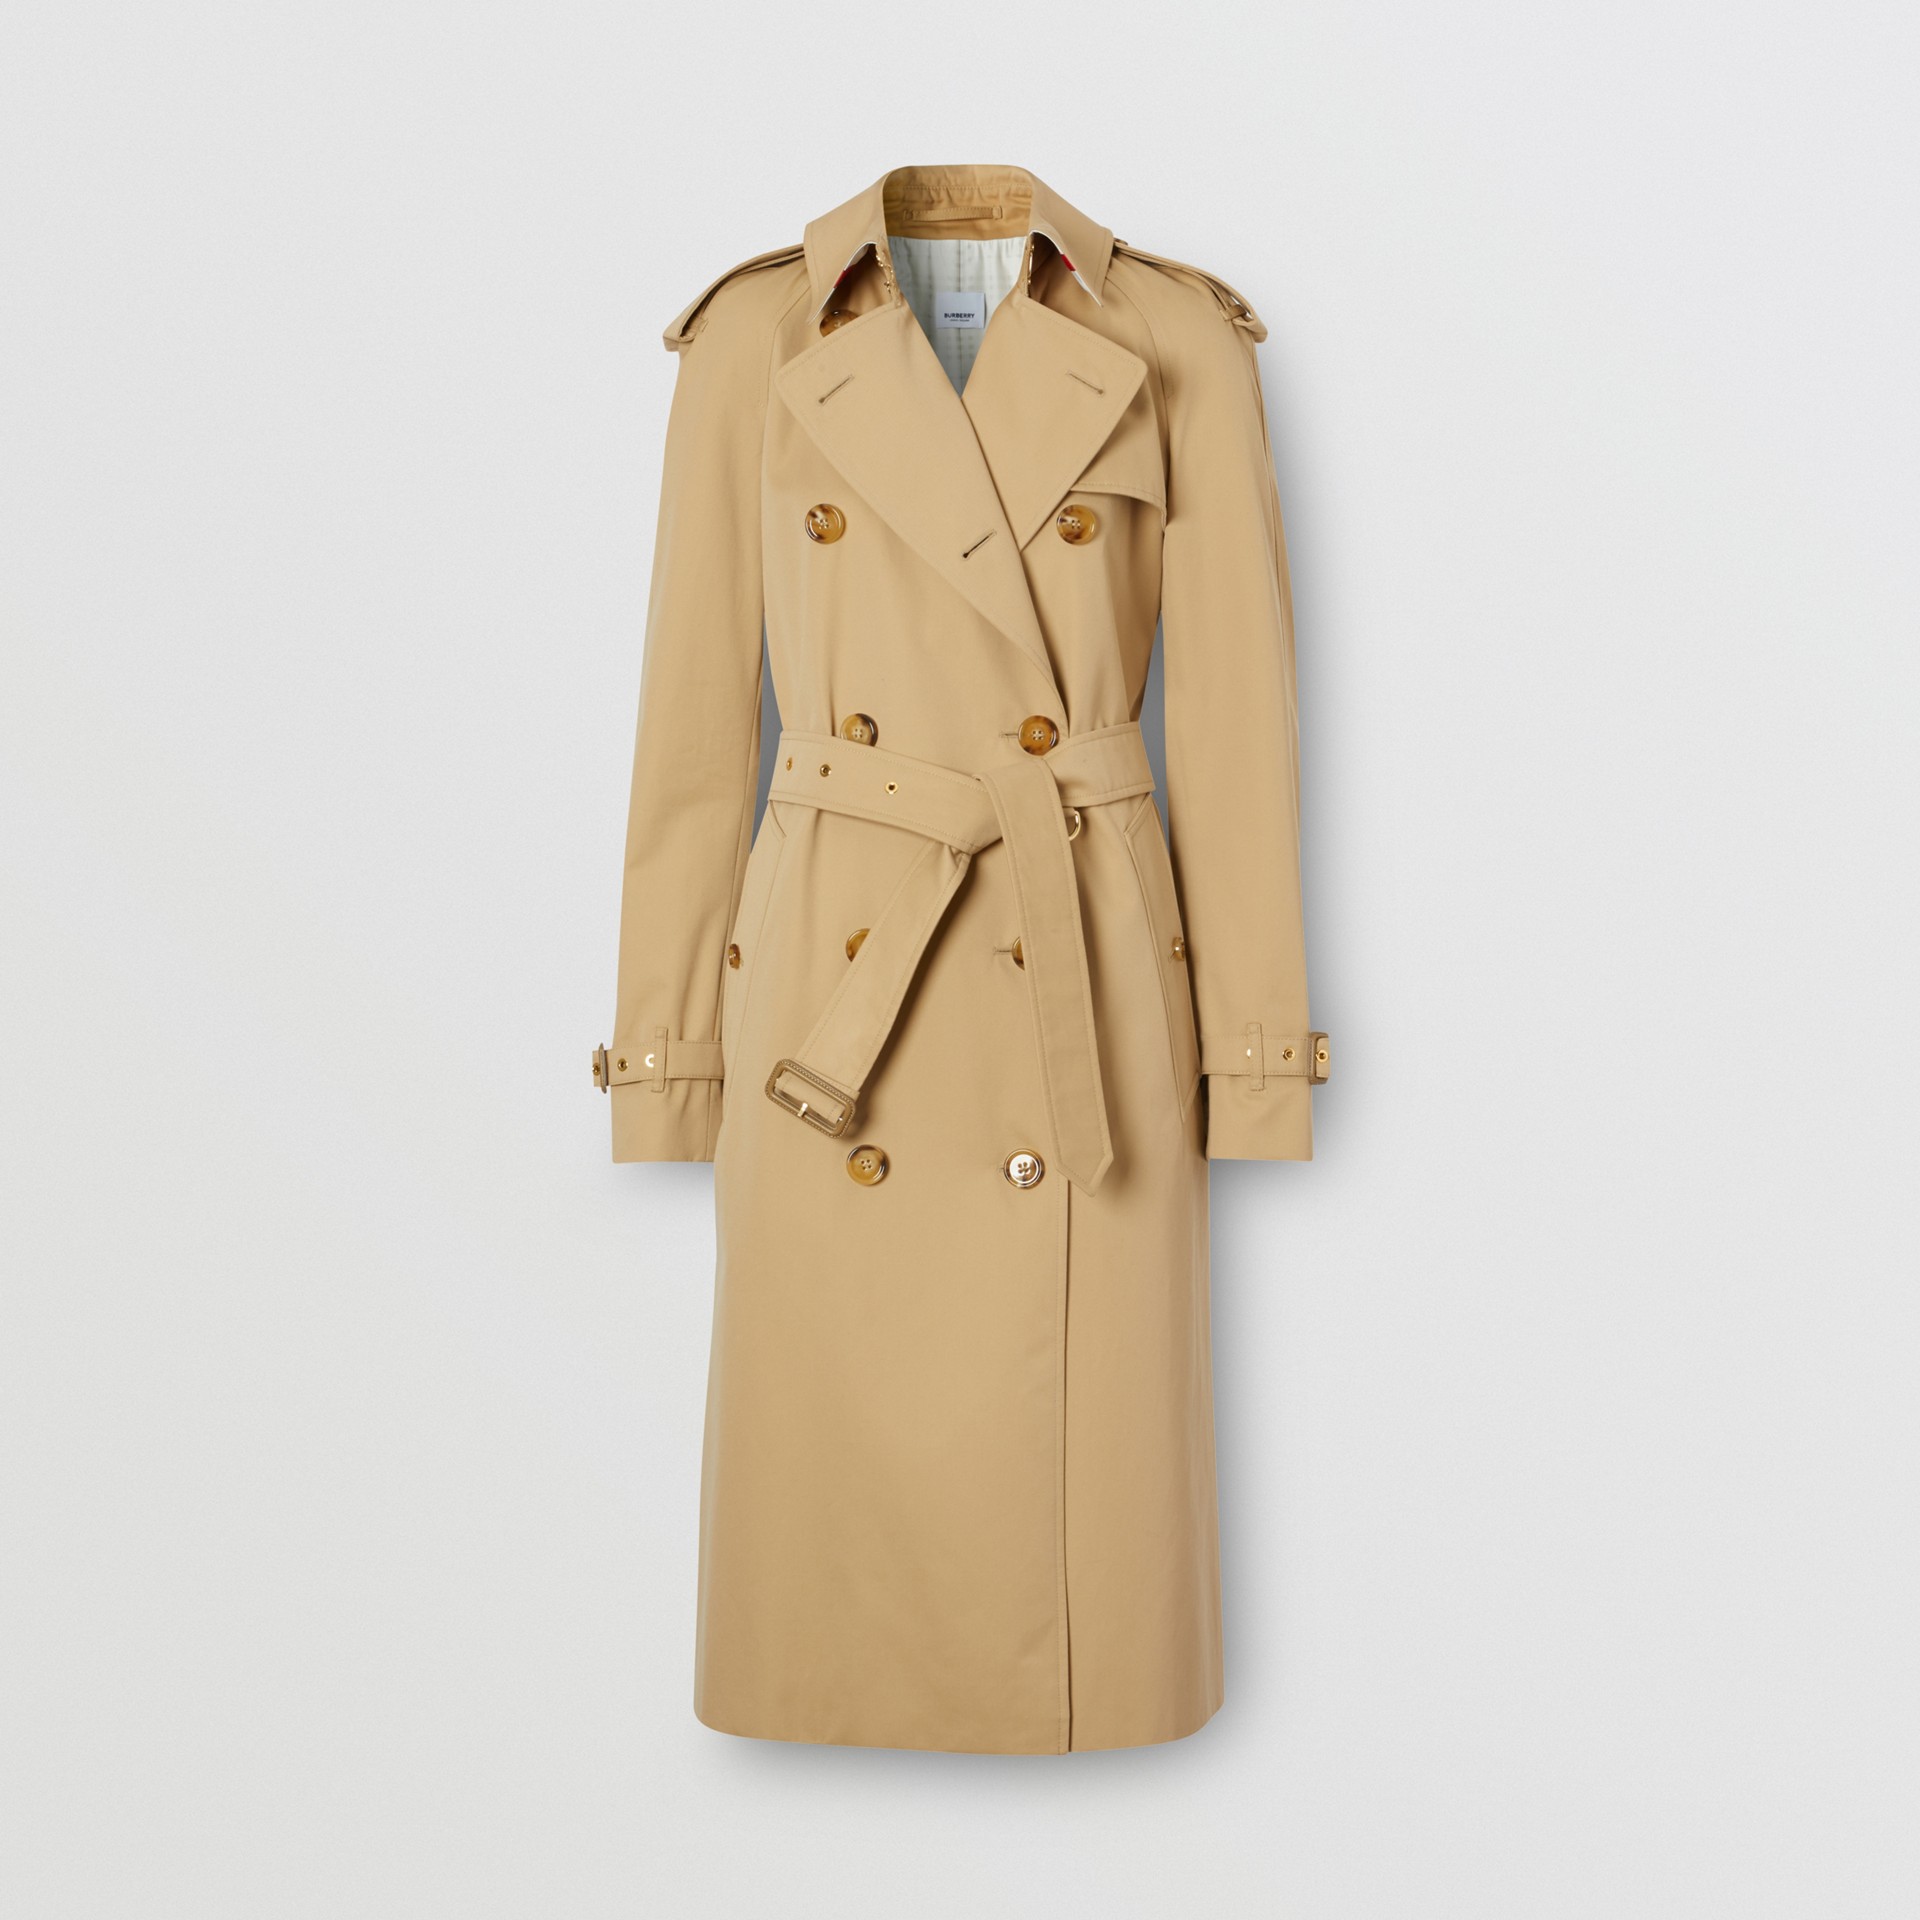 Archive Scarf Print-lined Trench Coat - Women | Burberry United States